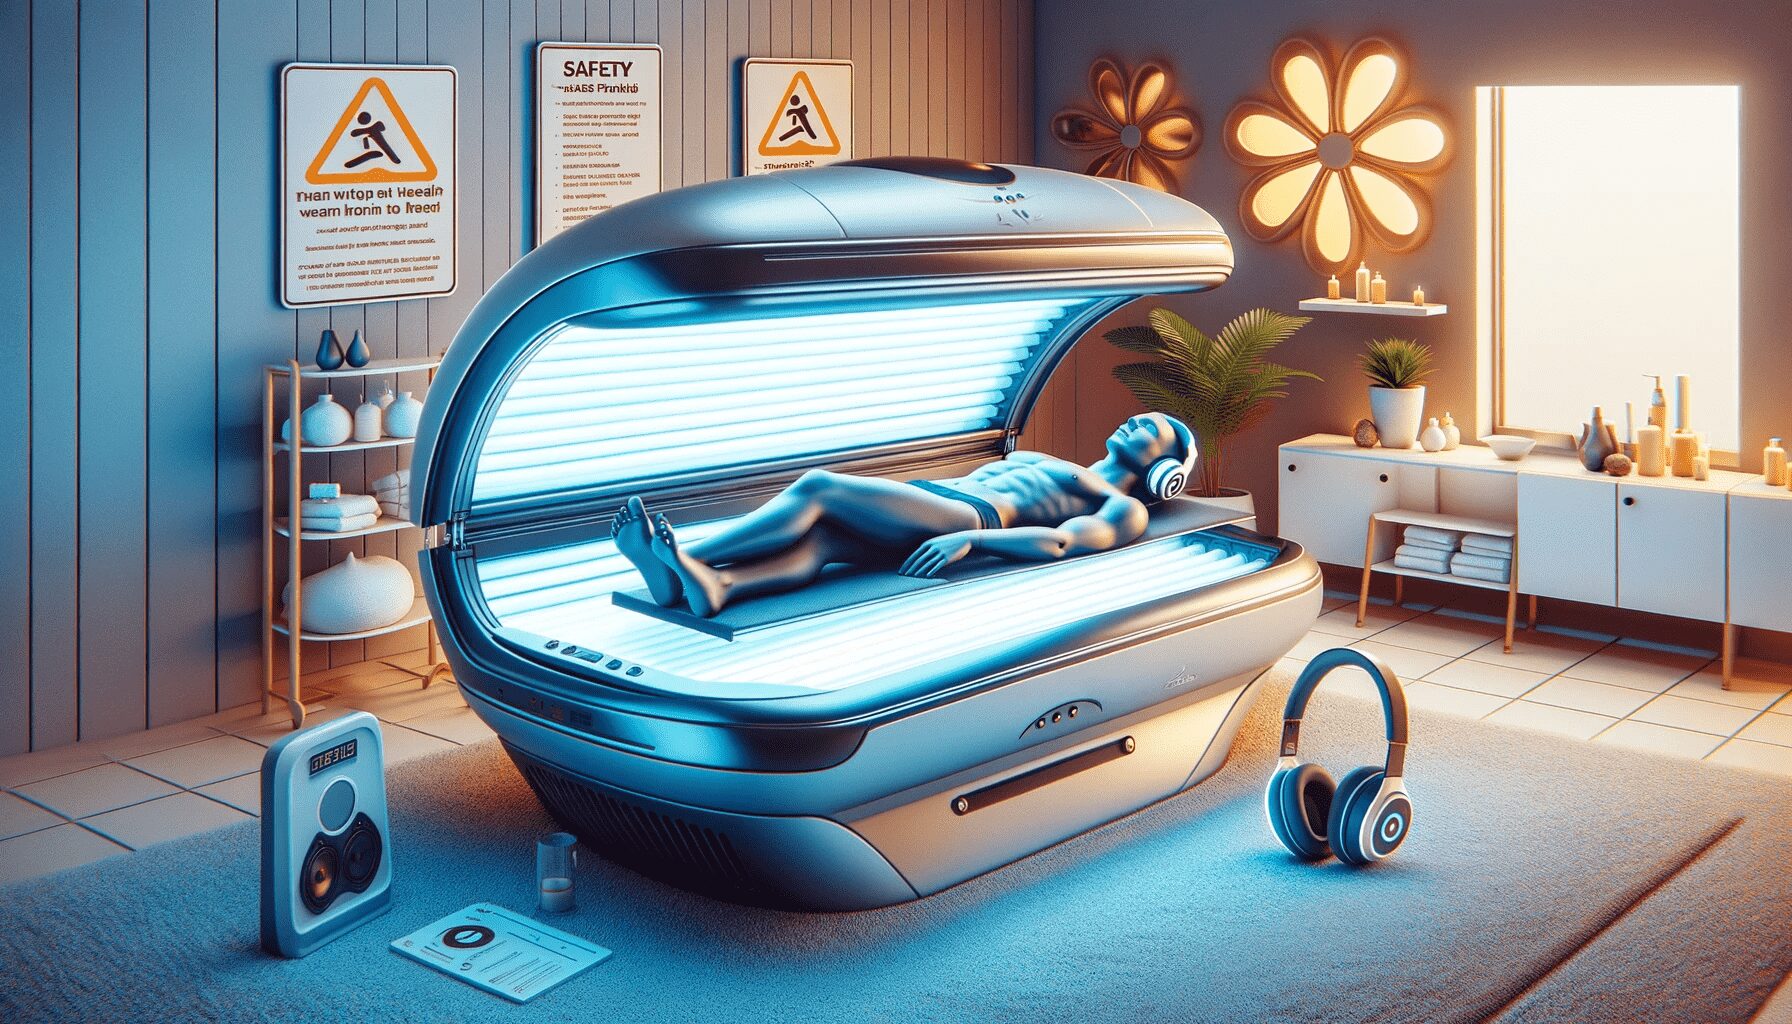 Can You Wear Headphones in a Tanning Bed? Find Out!